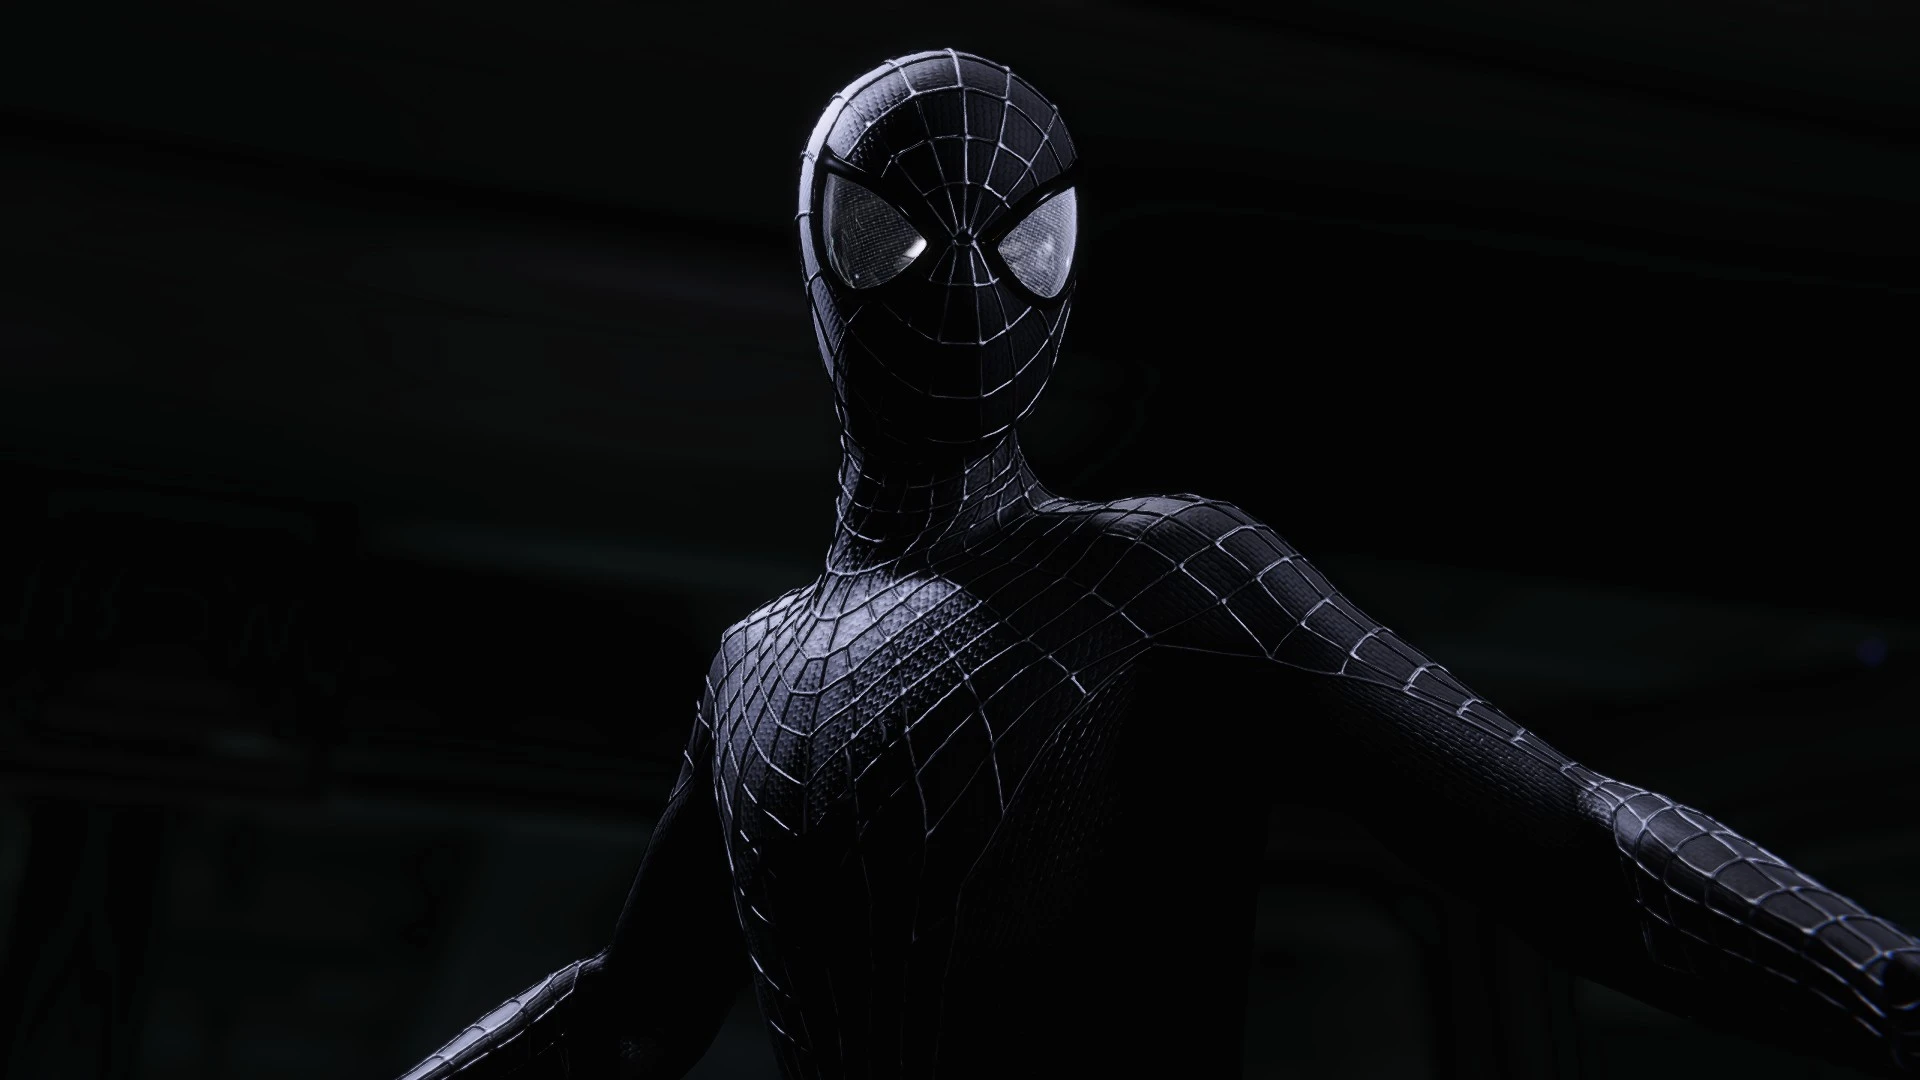 The Amazing Collection (V4), Marvel's Spider-Man Remastered